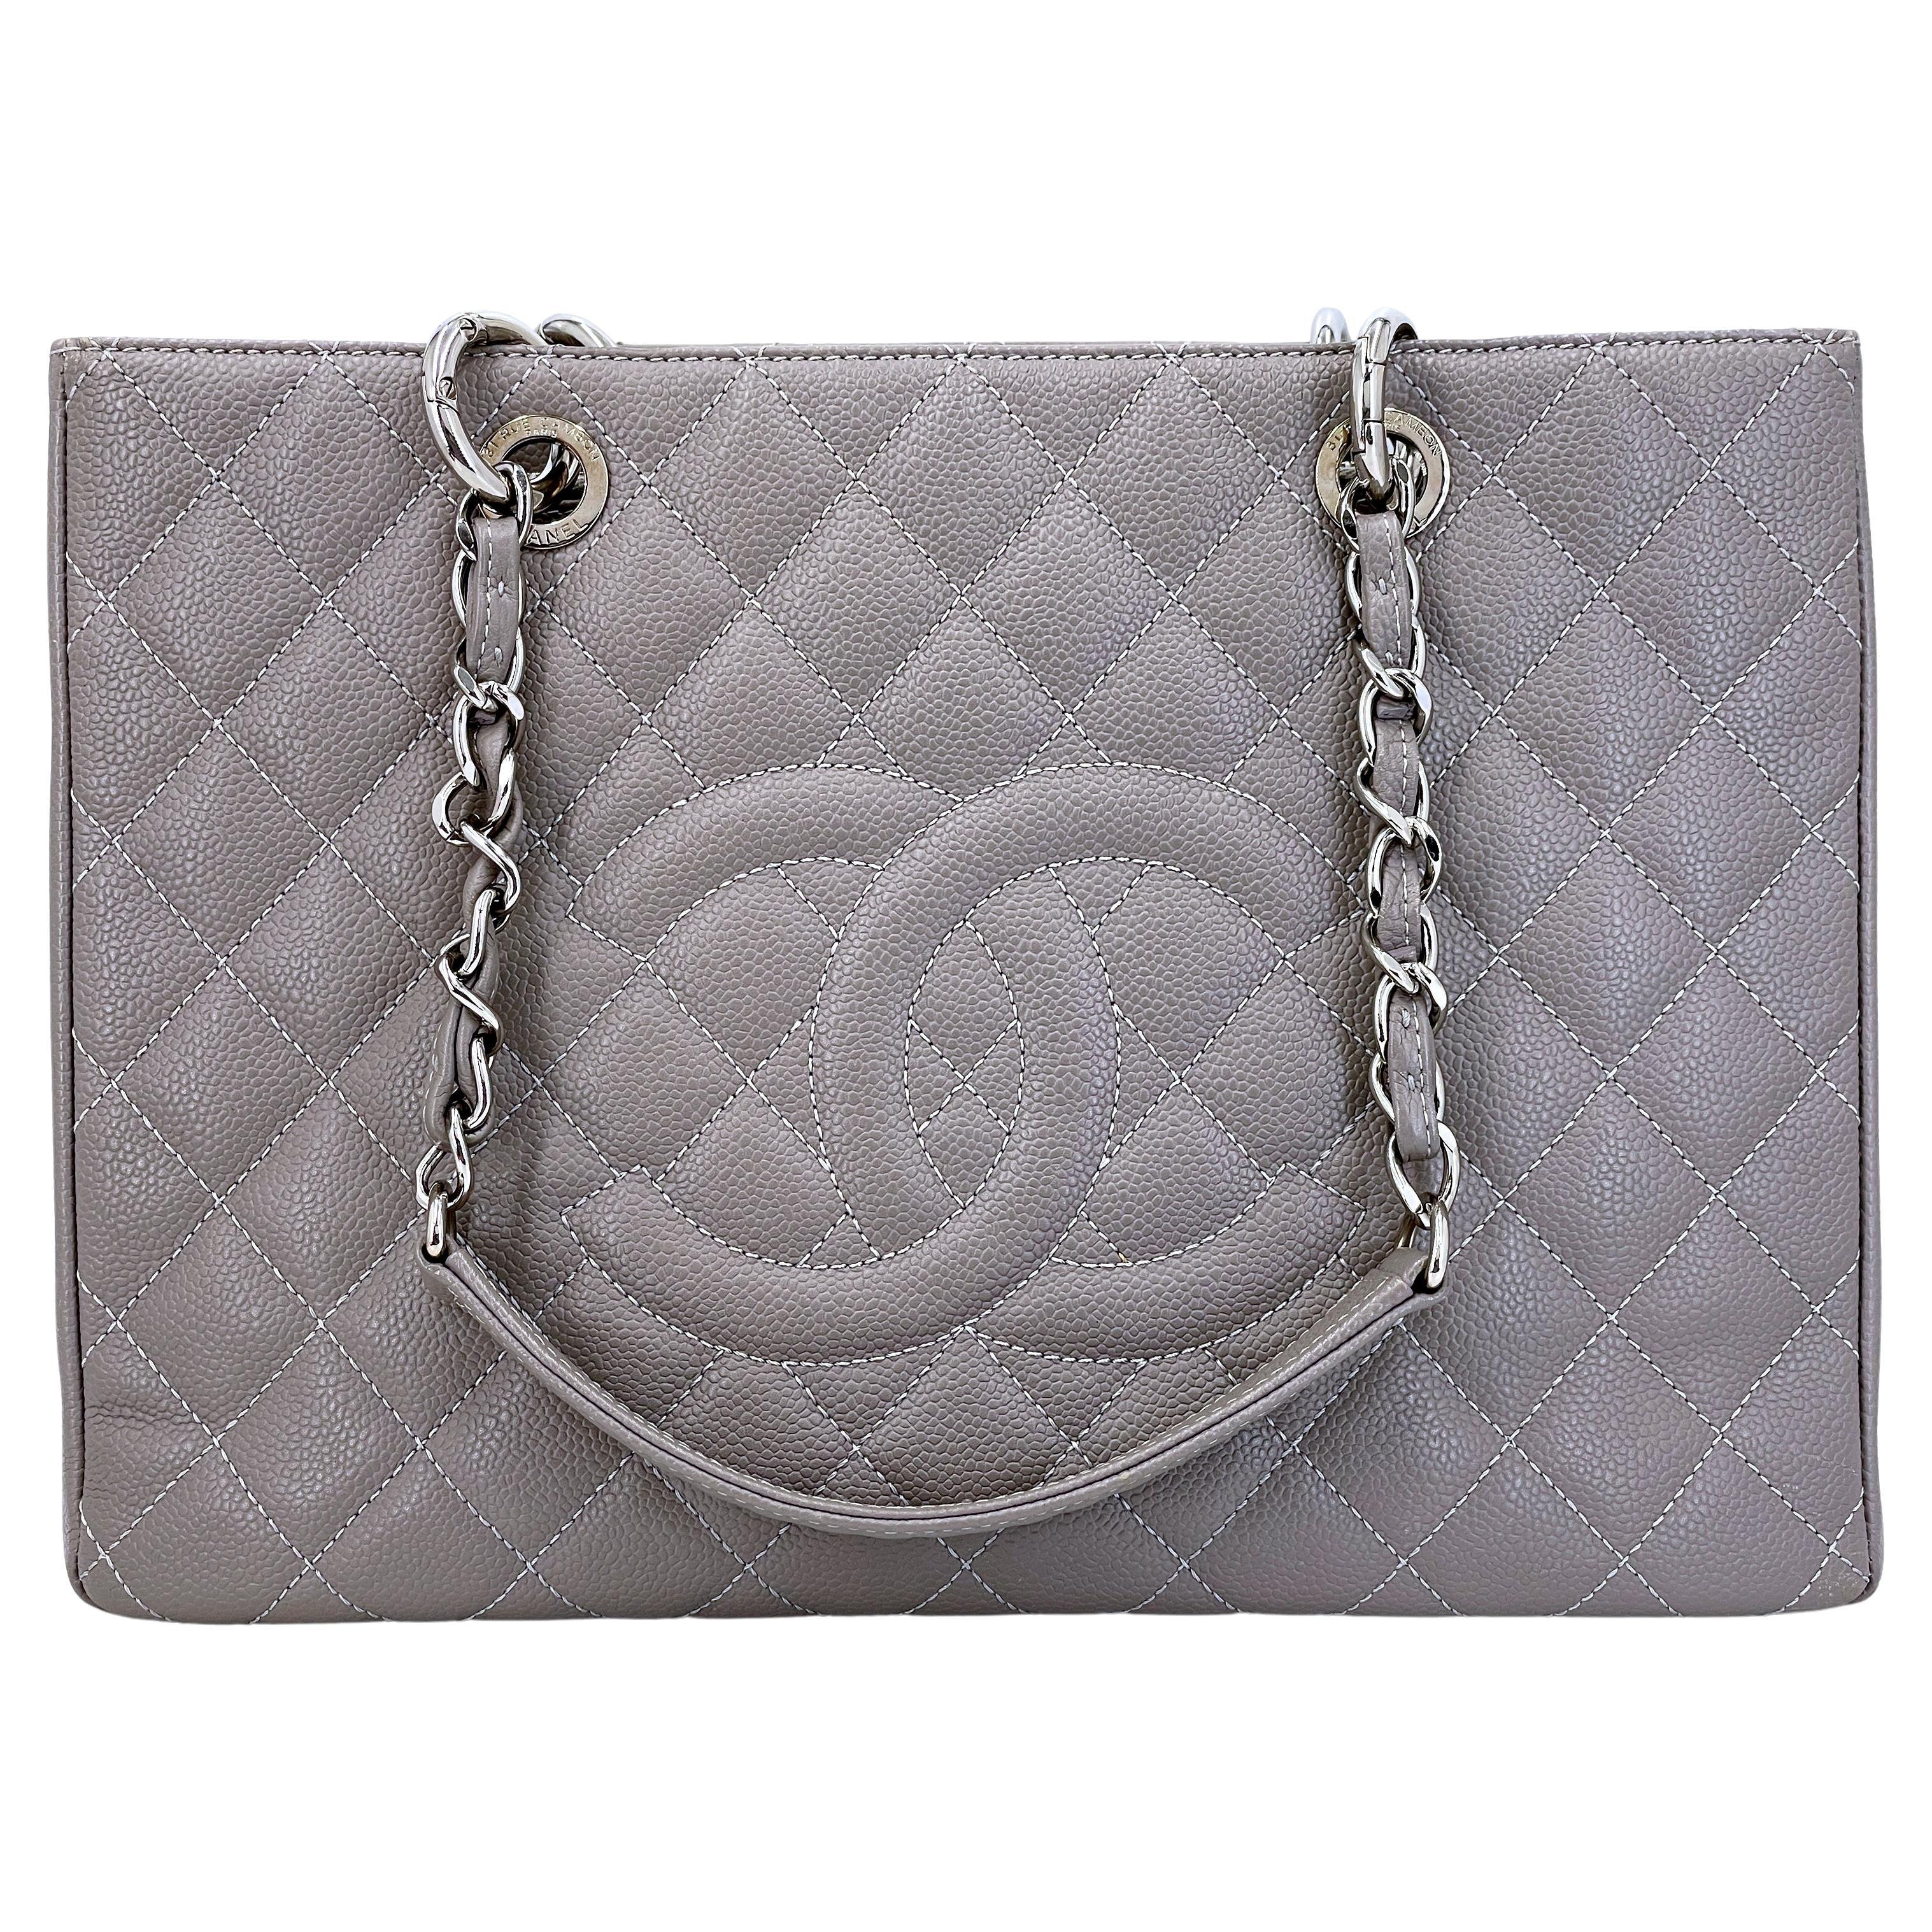 chanel tote bag with zipper